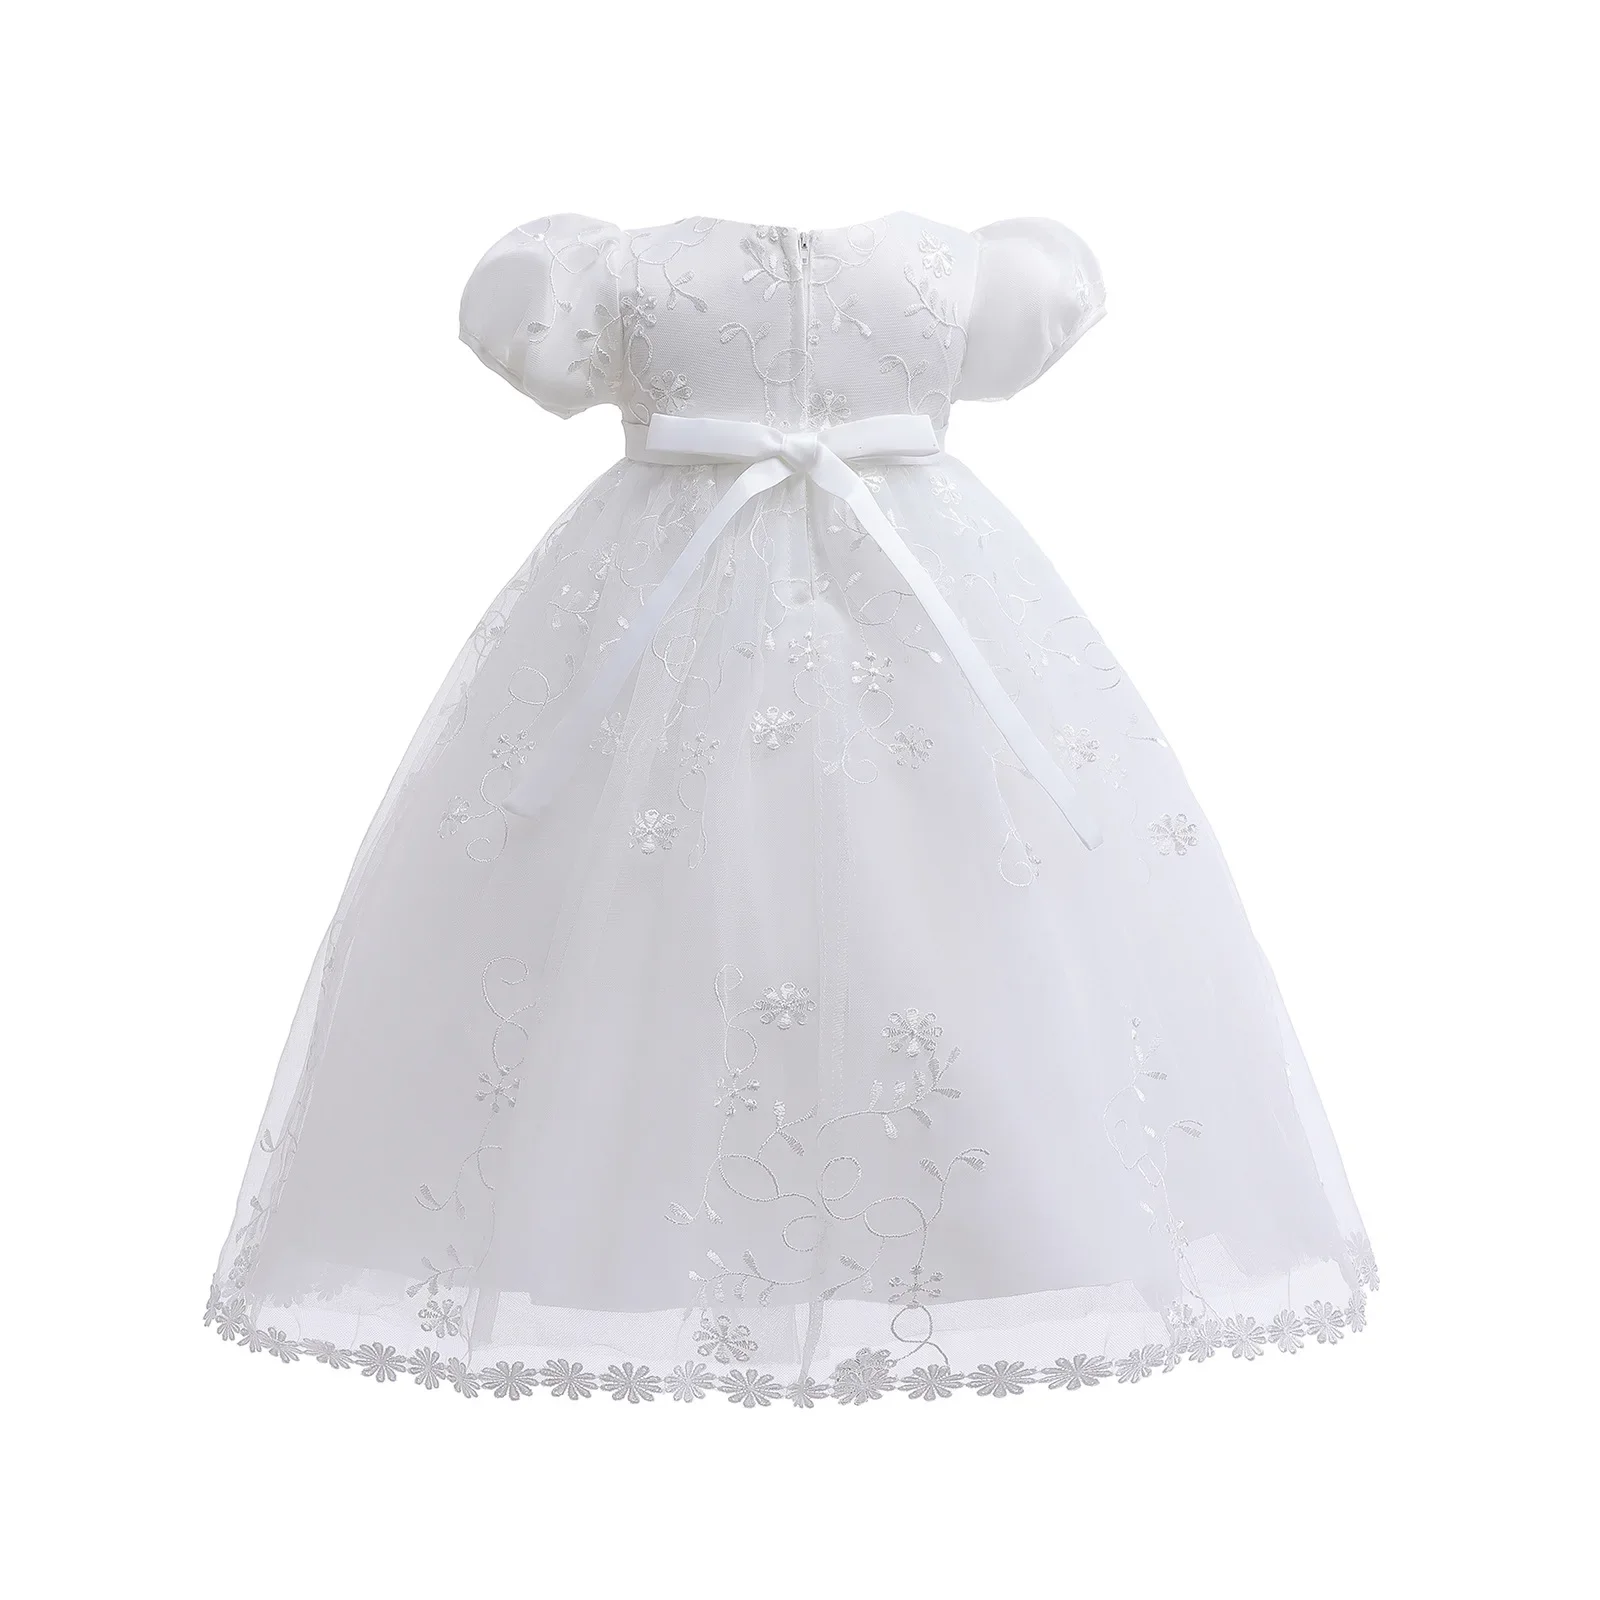 

Baby Girl Baptism Dresses White Lace Infant First Birthday Wedding Party Dress Bebes Newborn Christening Ball Gown 0 to 24 Years